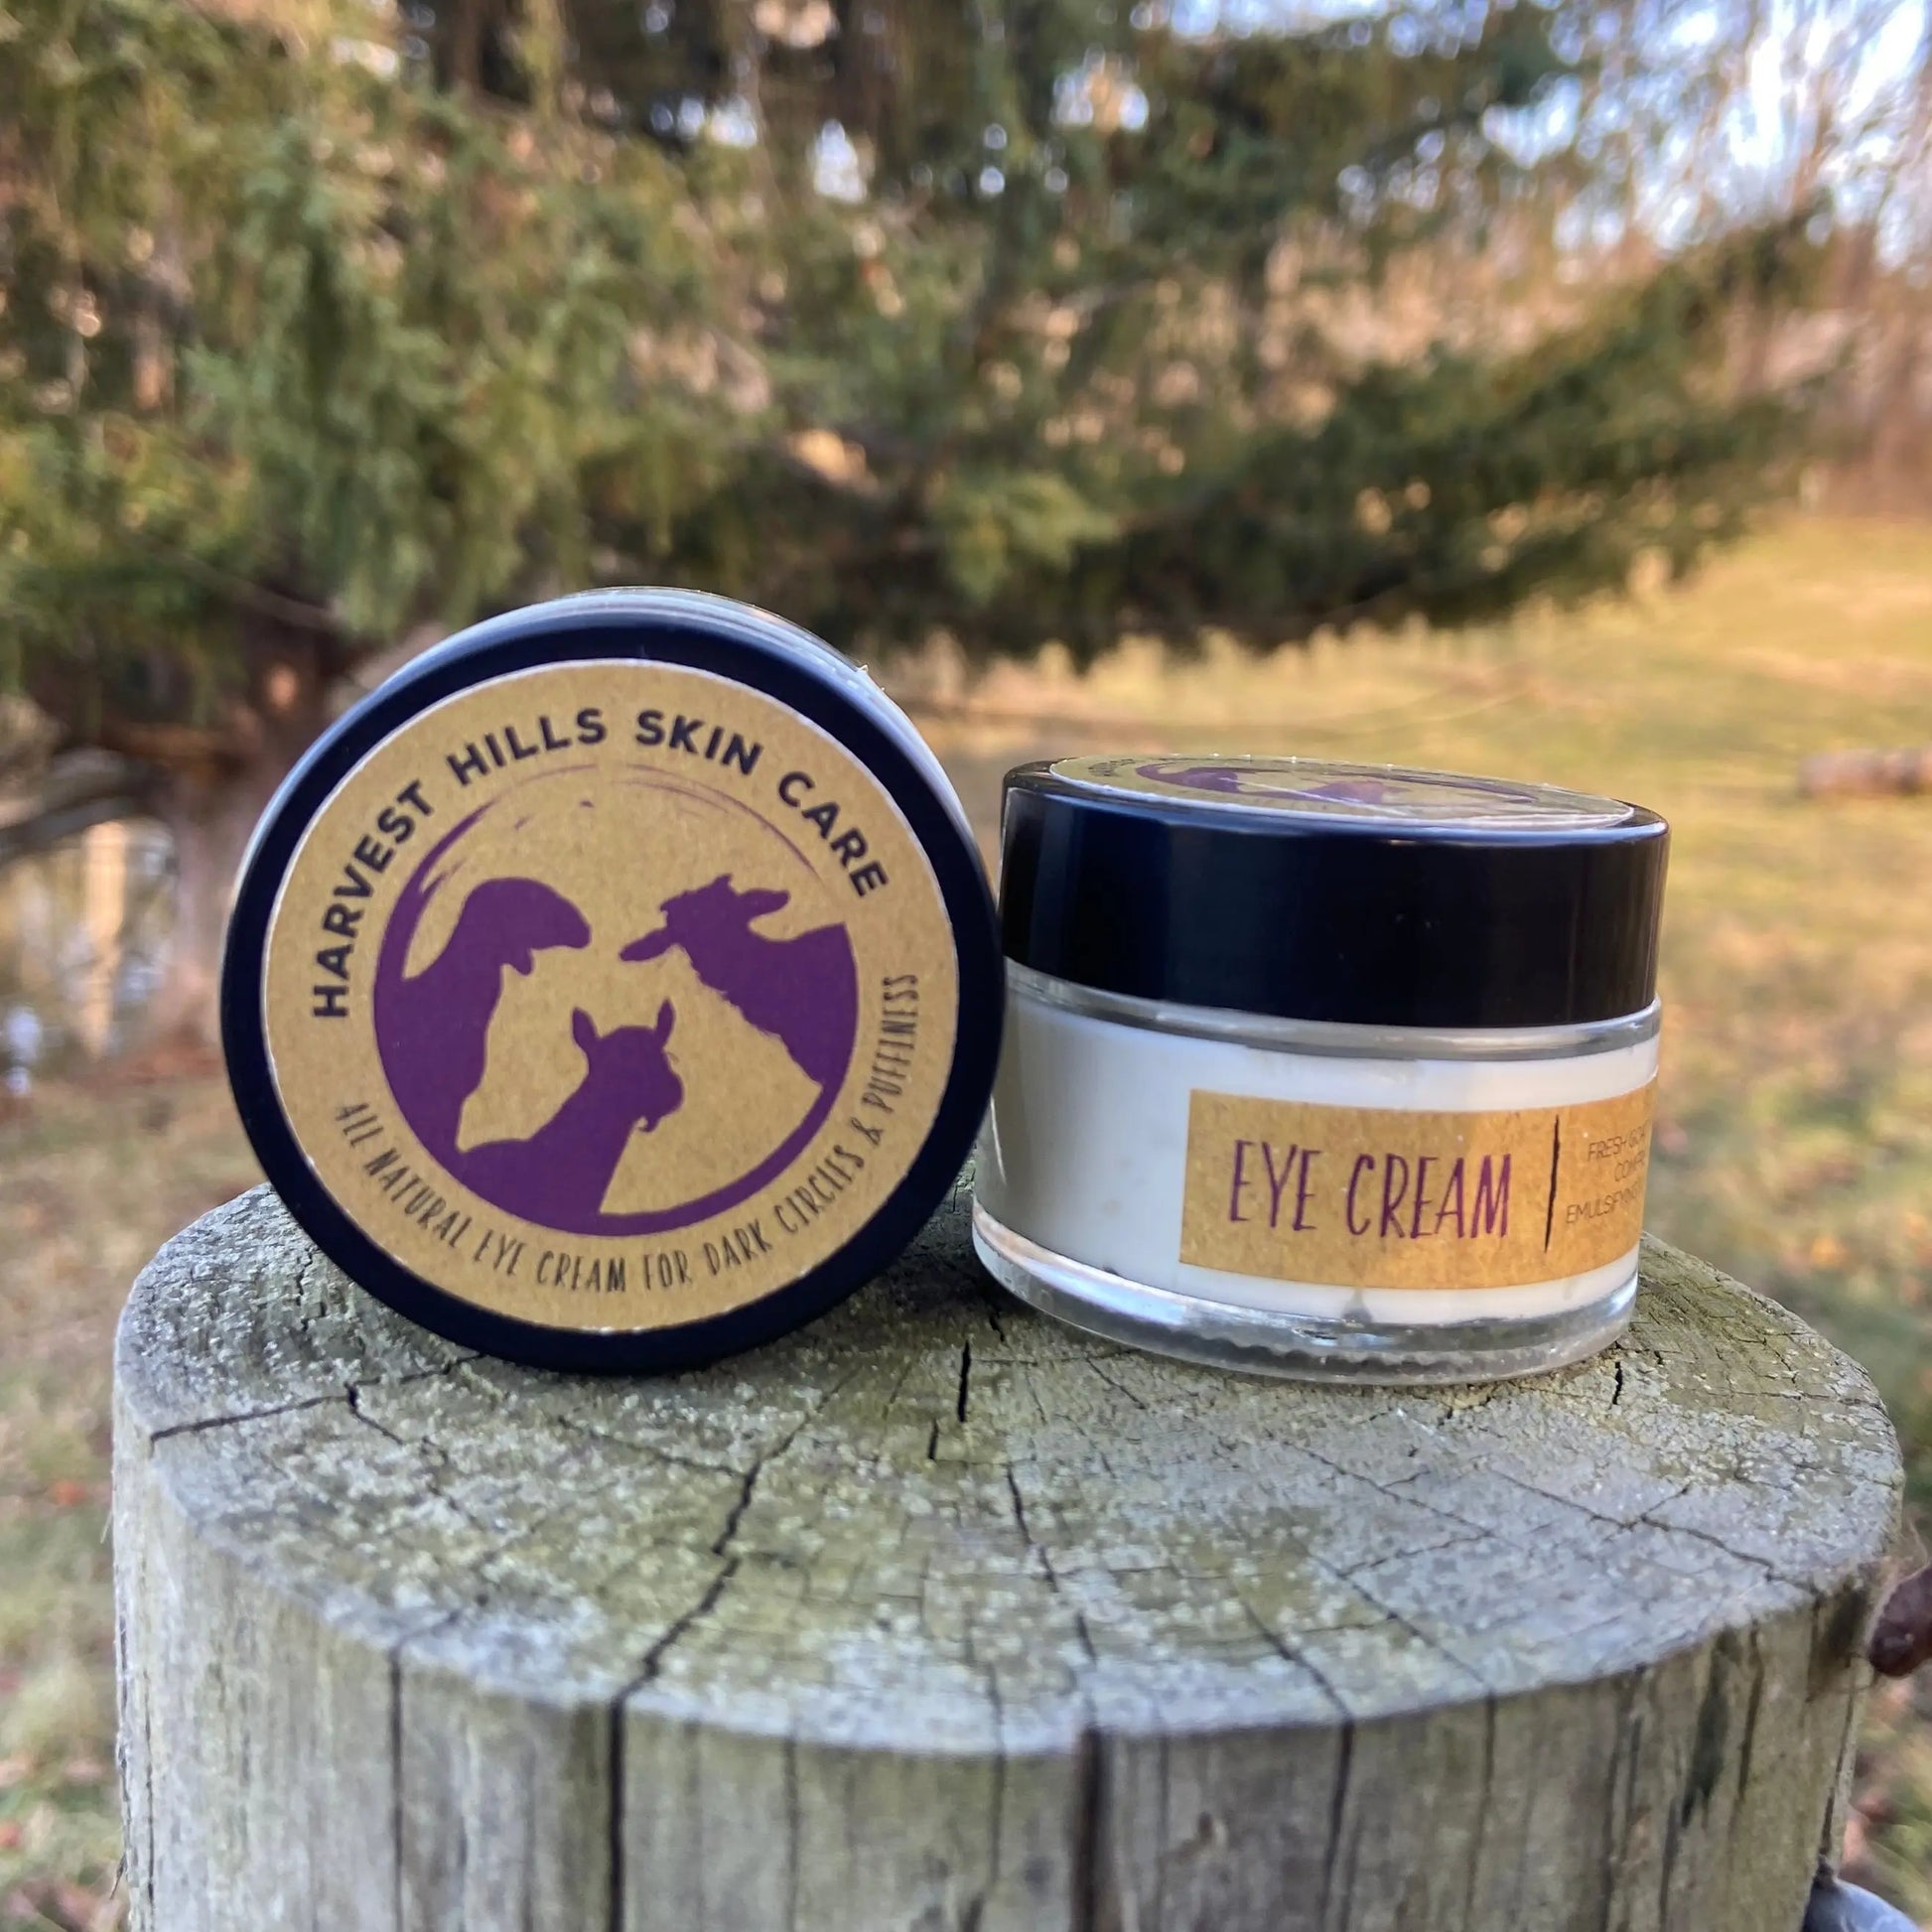 Eye Cream for dark circles and puffiness Harvest Hills Skin Care - All Natural Goat Milk Skin Care, LLC